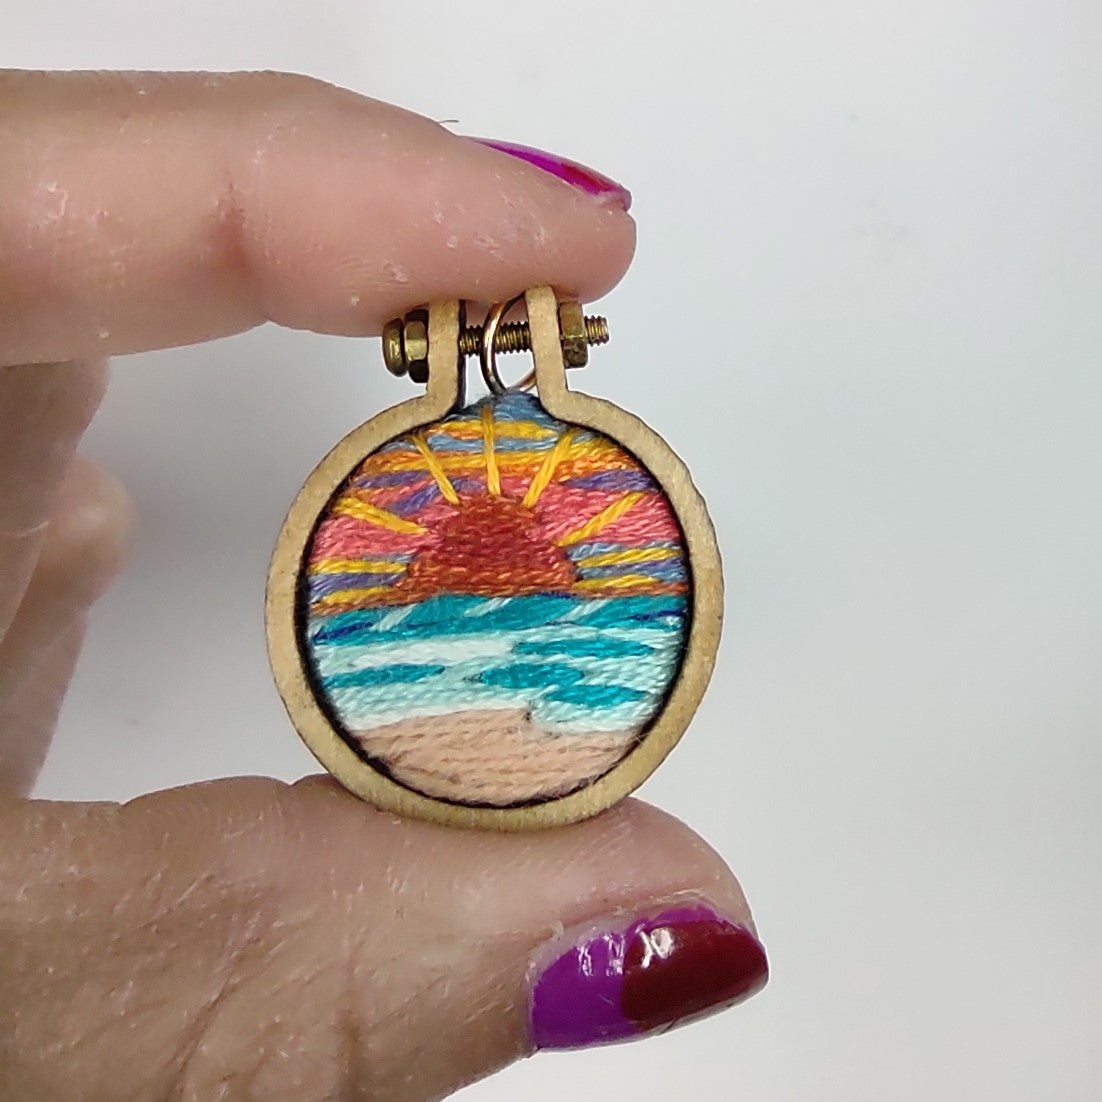 Handmade Embroidered Sunset by the Beach Landscape Pendant Necklace